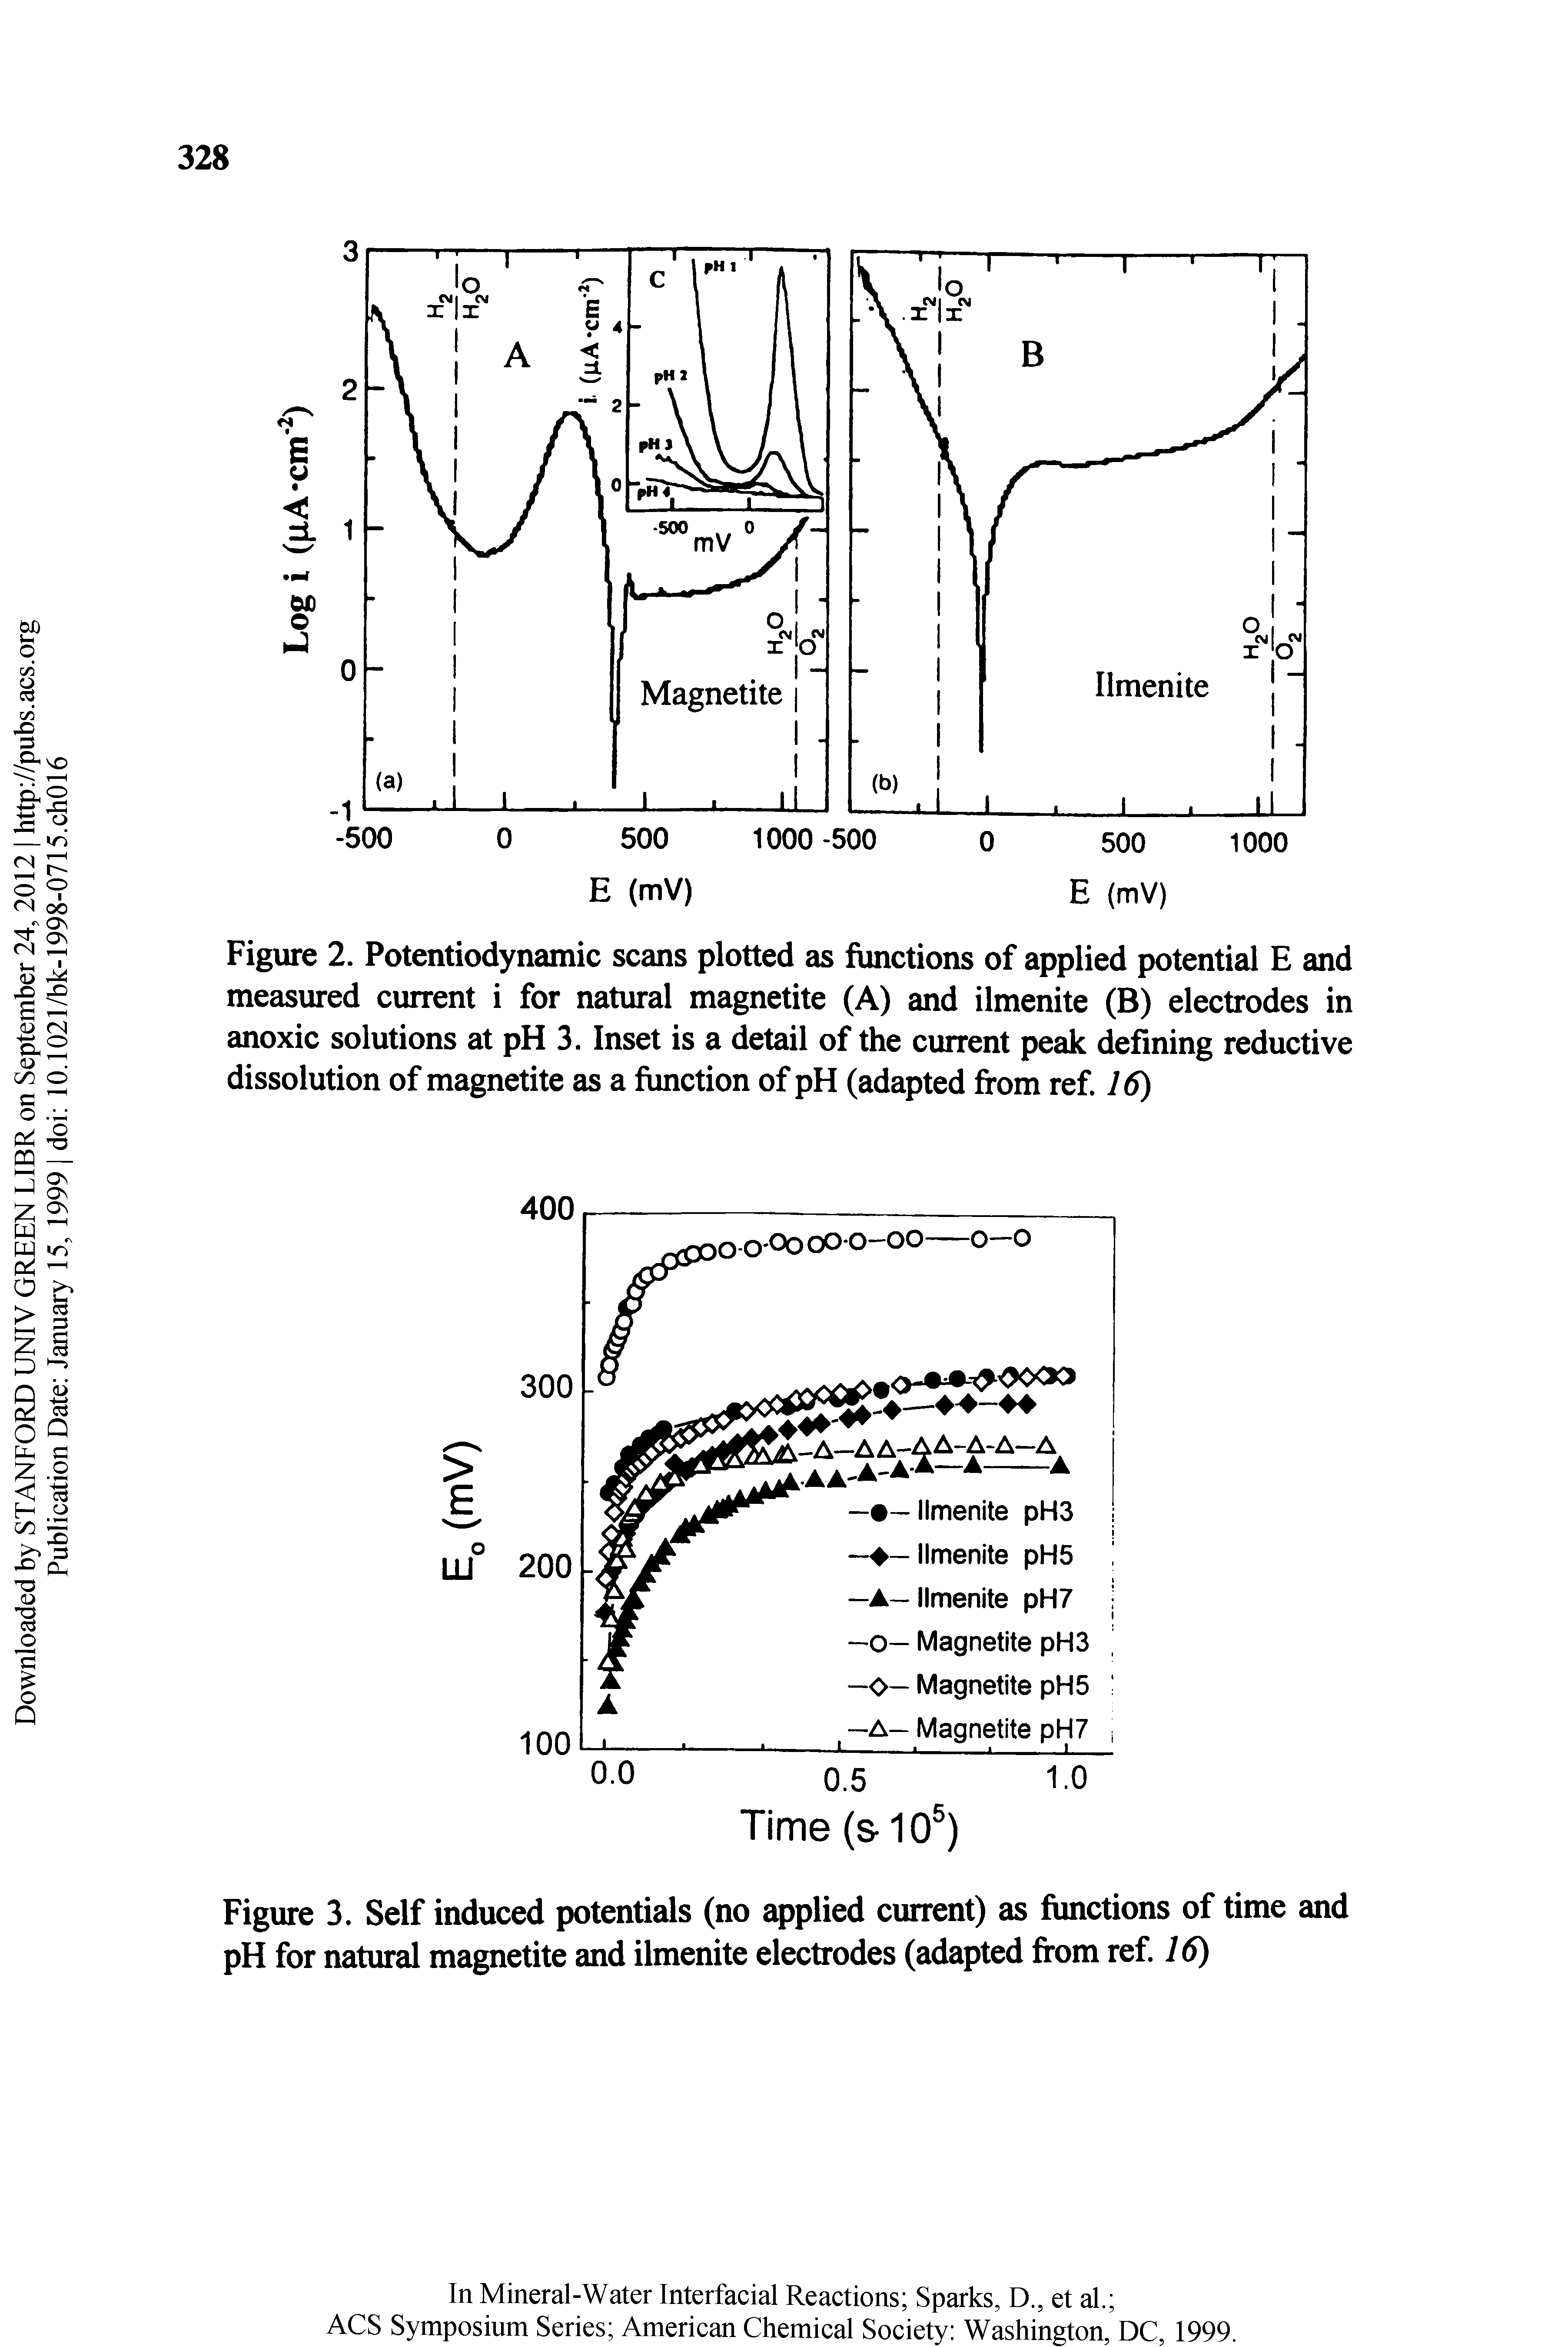 Figure 2. Potentiodynamic scans plotted as functions of applied potential E and measured current i for natural magnetite (A) and ilmenite (B) electrodes in anoxic solutions at pH 3. Inset is a detail of the current peak defining reductive dissolution of magnetite as a function of pH (adapted from ref. 16)...